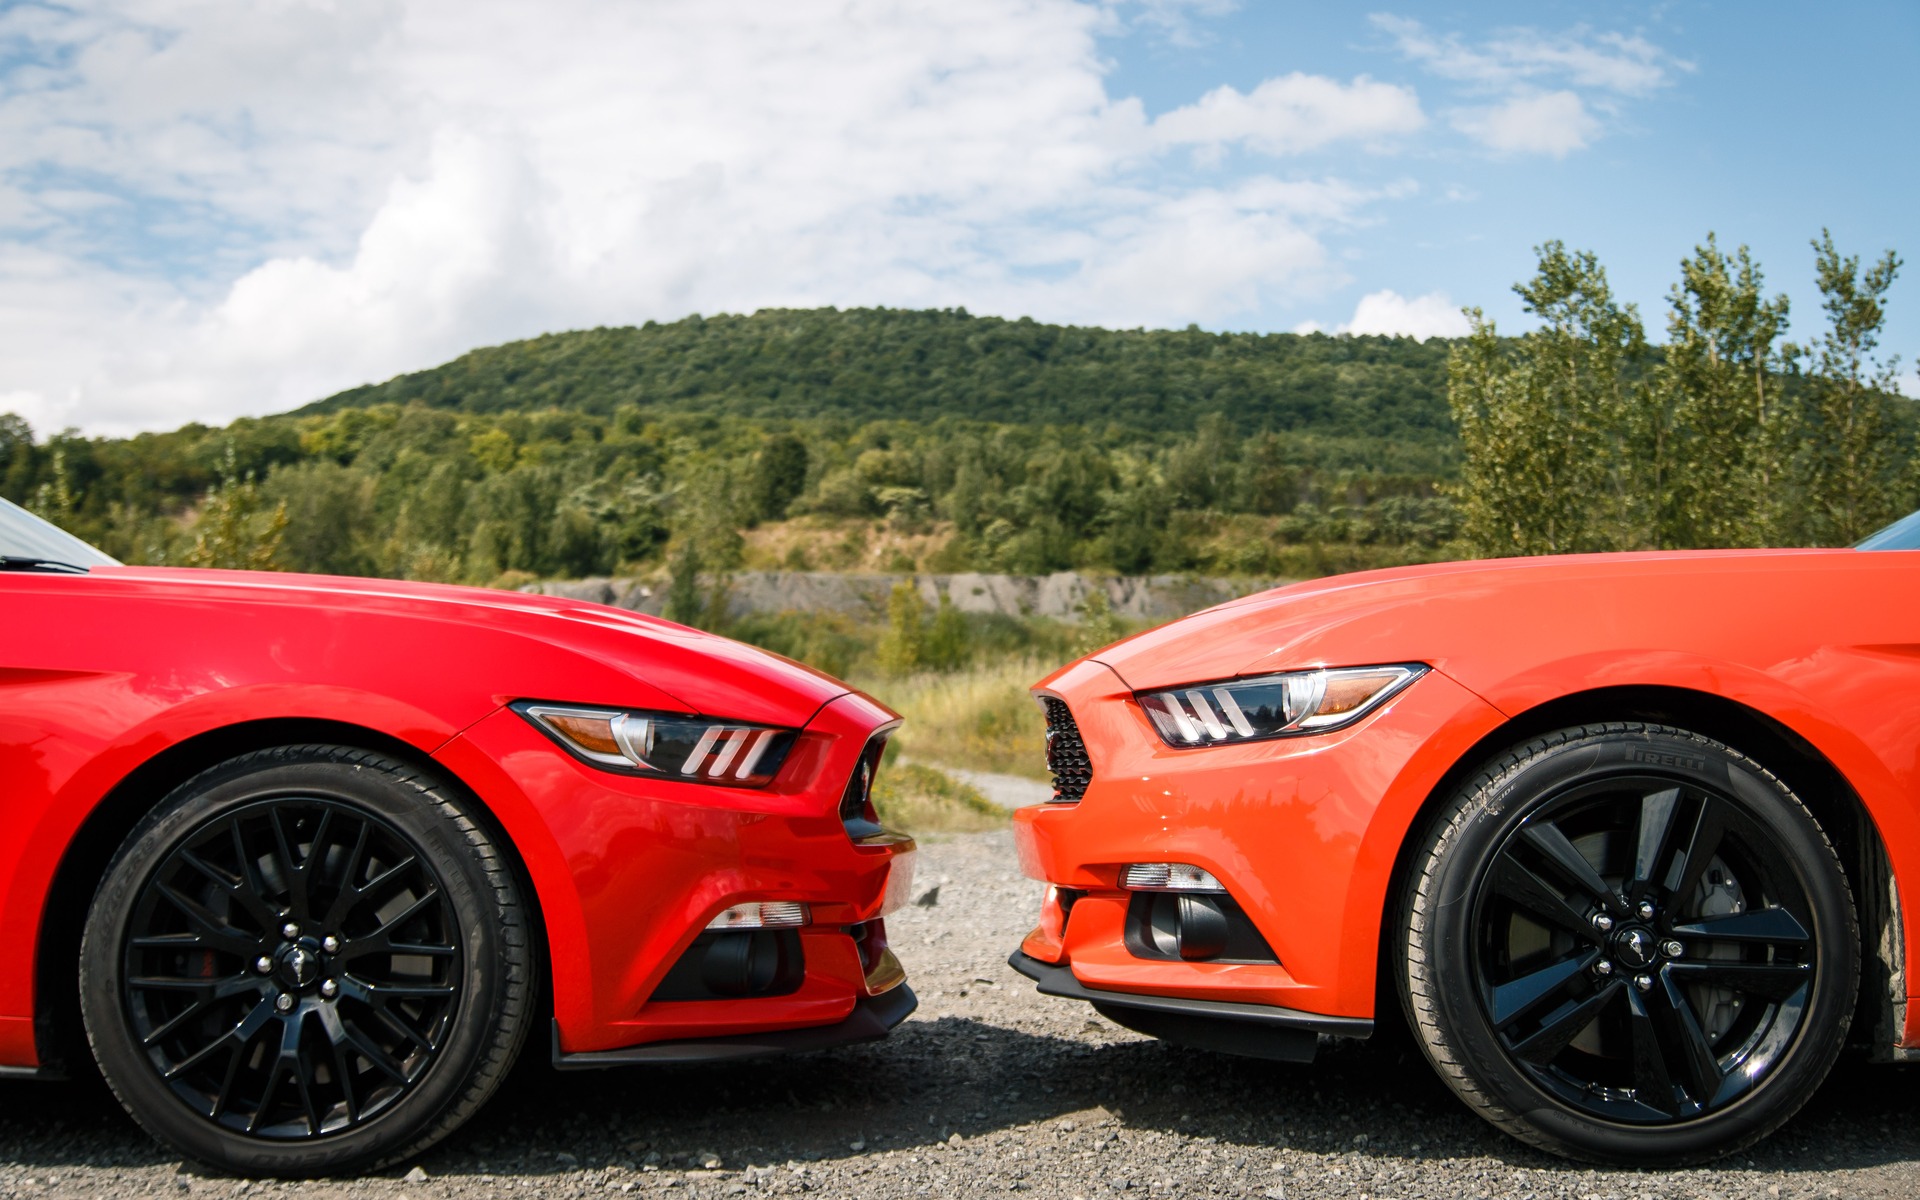 Ford Mustang GT VS Ford Mustang Ecoboost